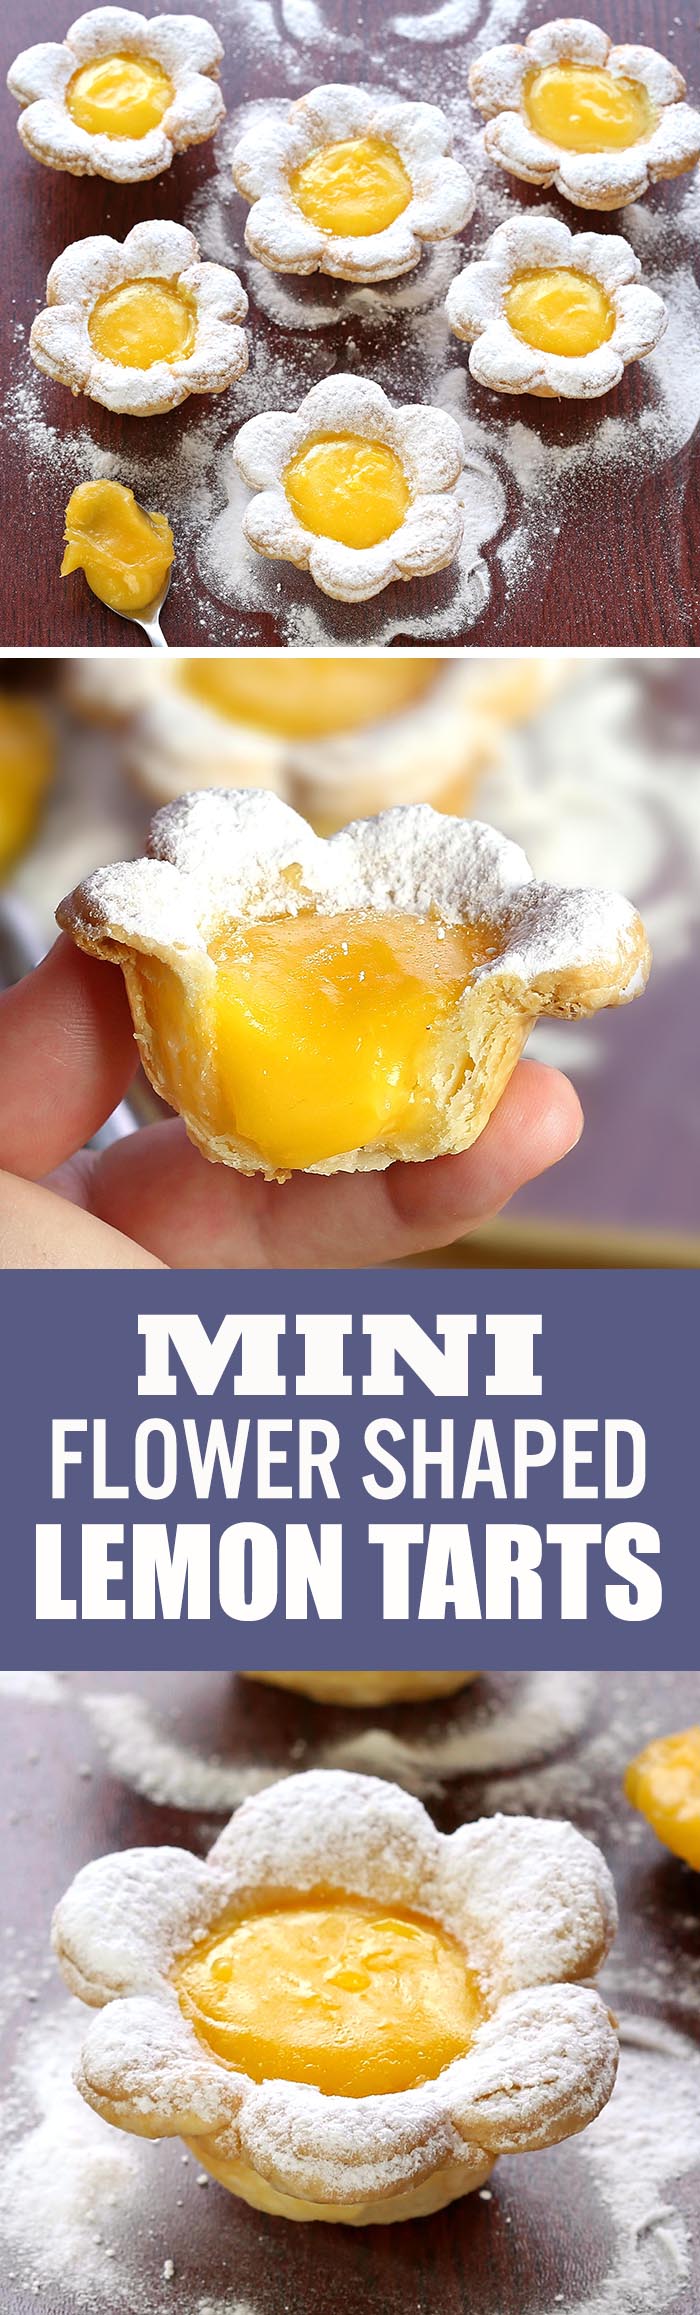 A bite sized dessert pretty enough for any special occasion. From Easter to Mother’s Day, birthdays to bridal showers, sure to impress.